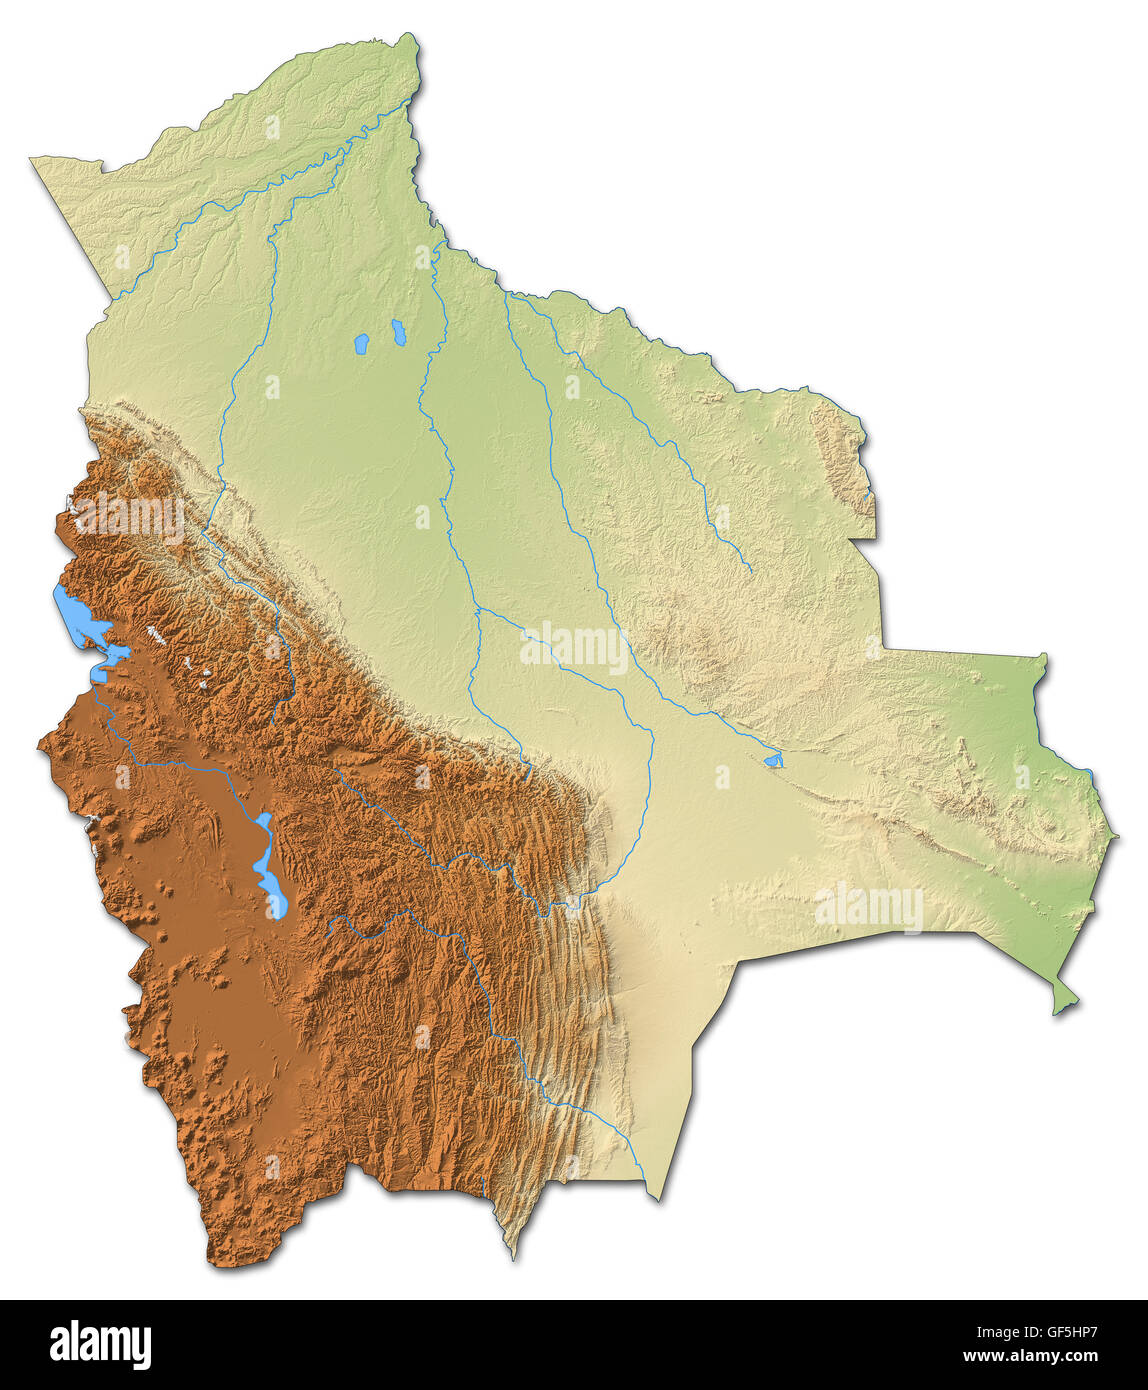 Relief map of Bolivia with shaded relief. Stock Photo